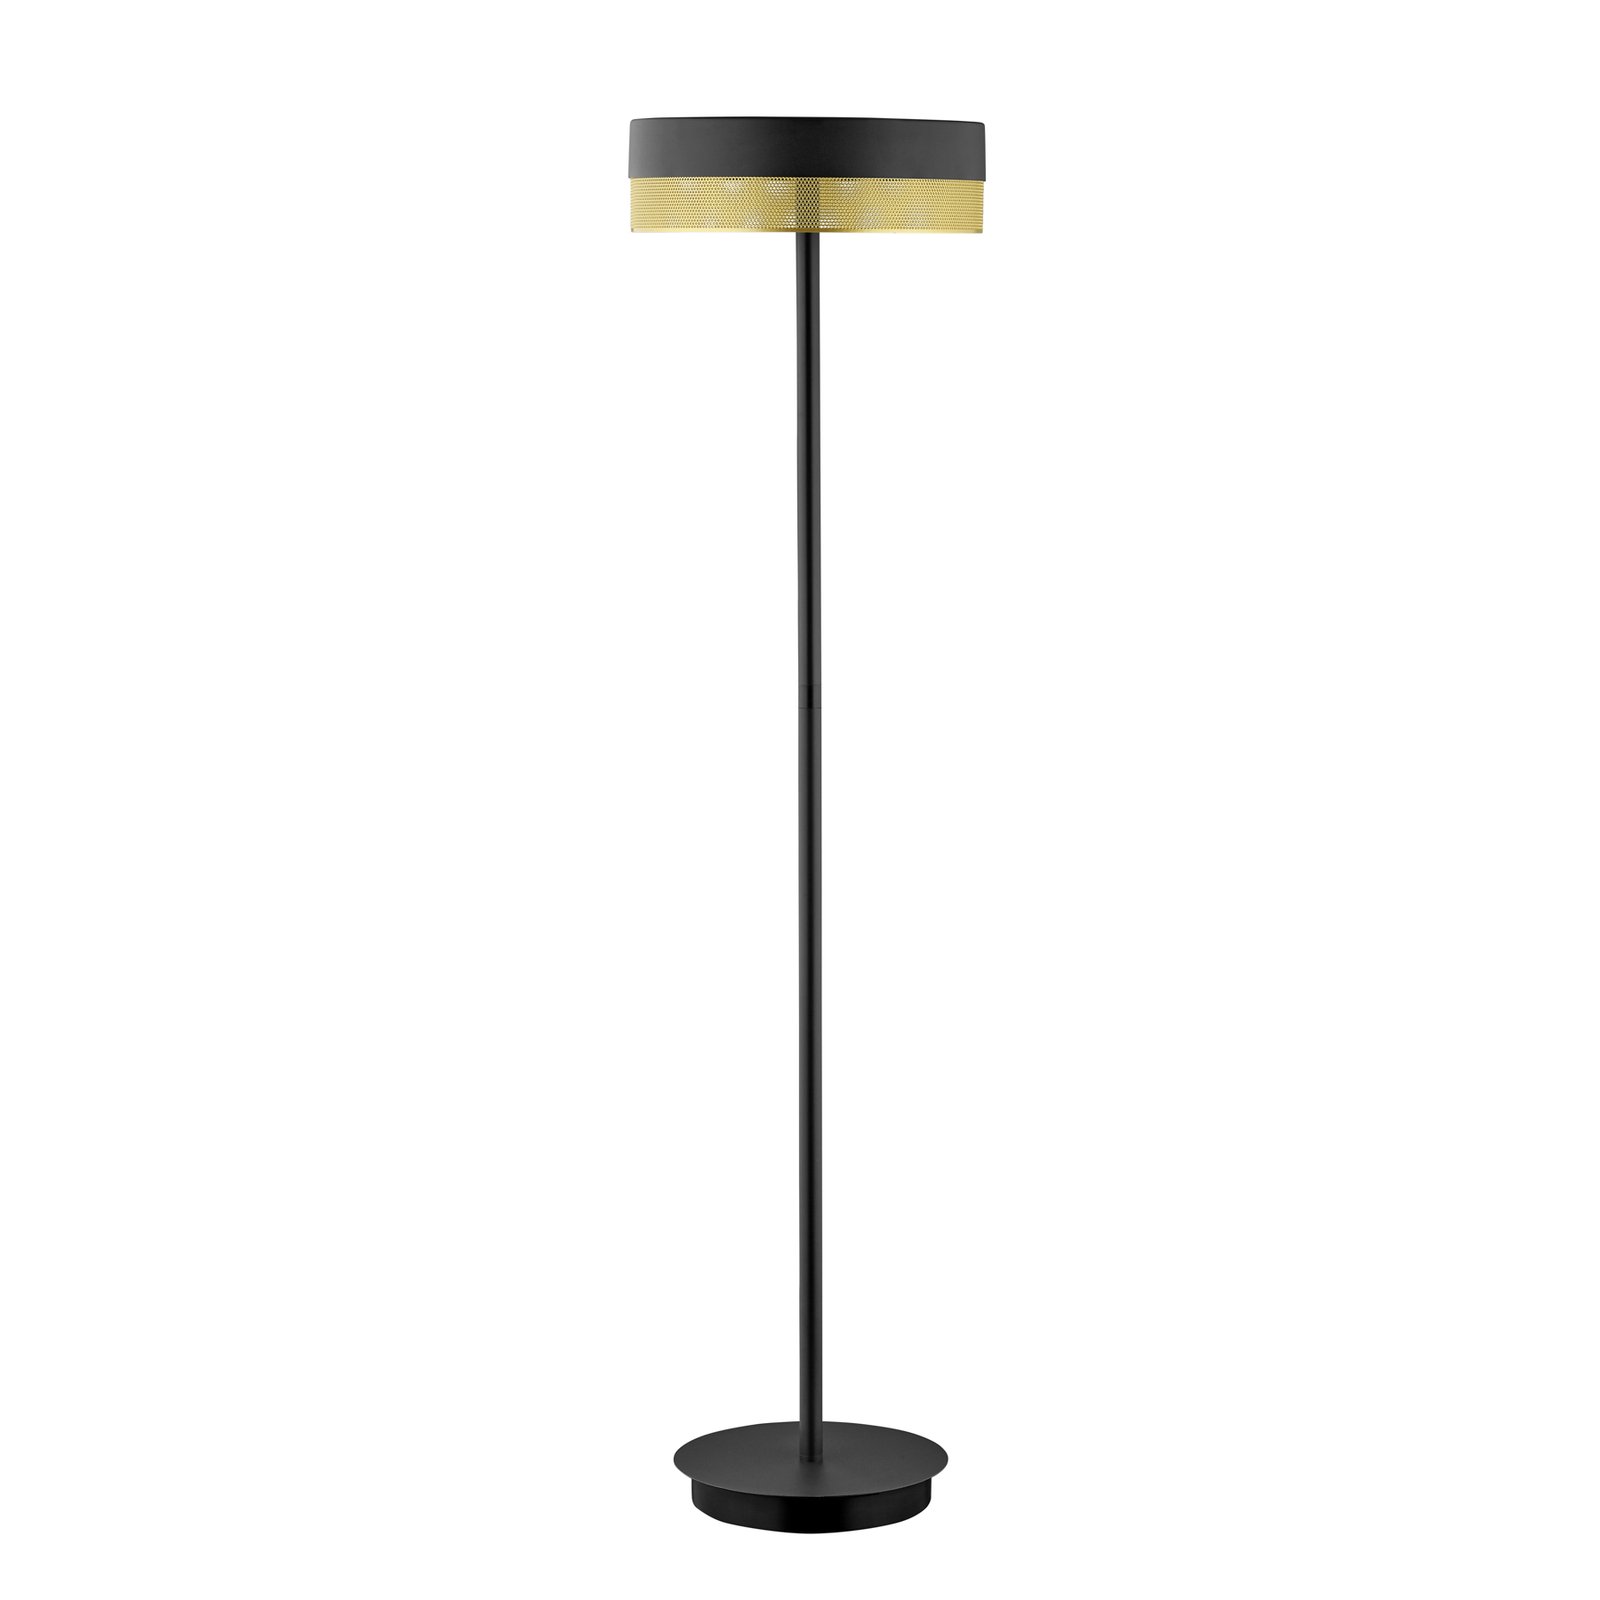 Mesh LED floor lamp with a dimmer, black/gold